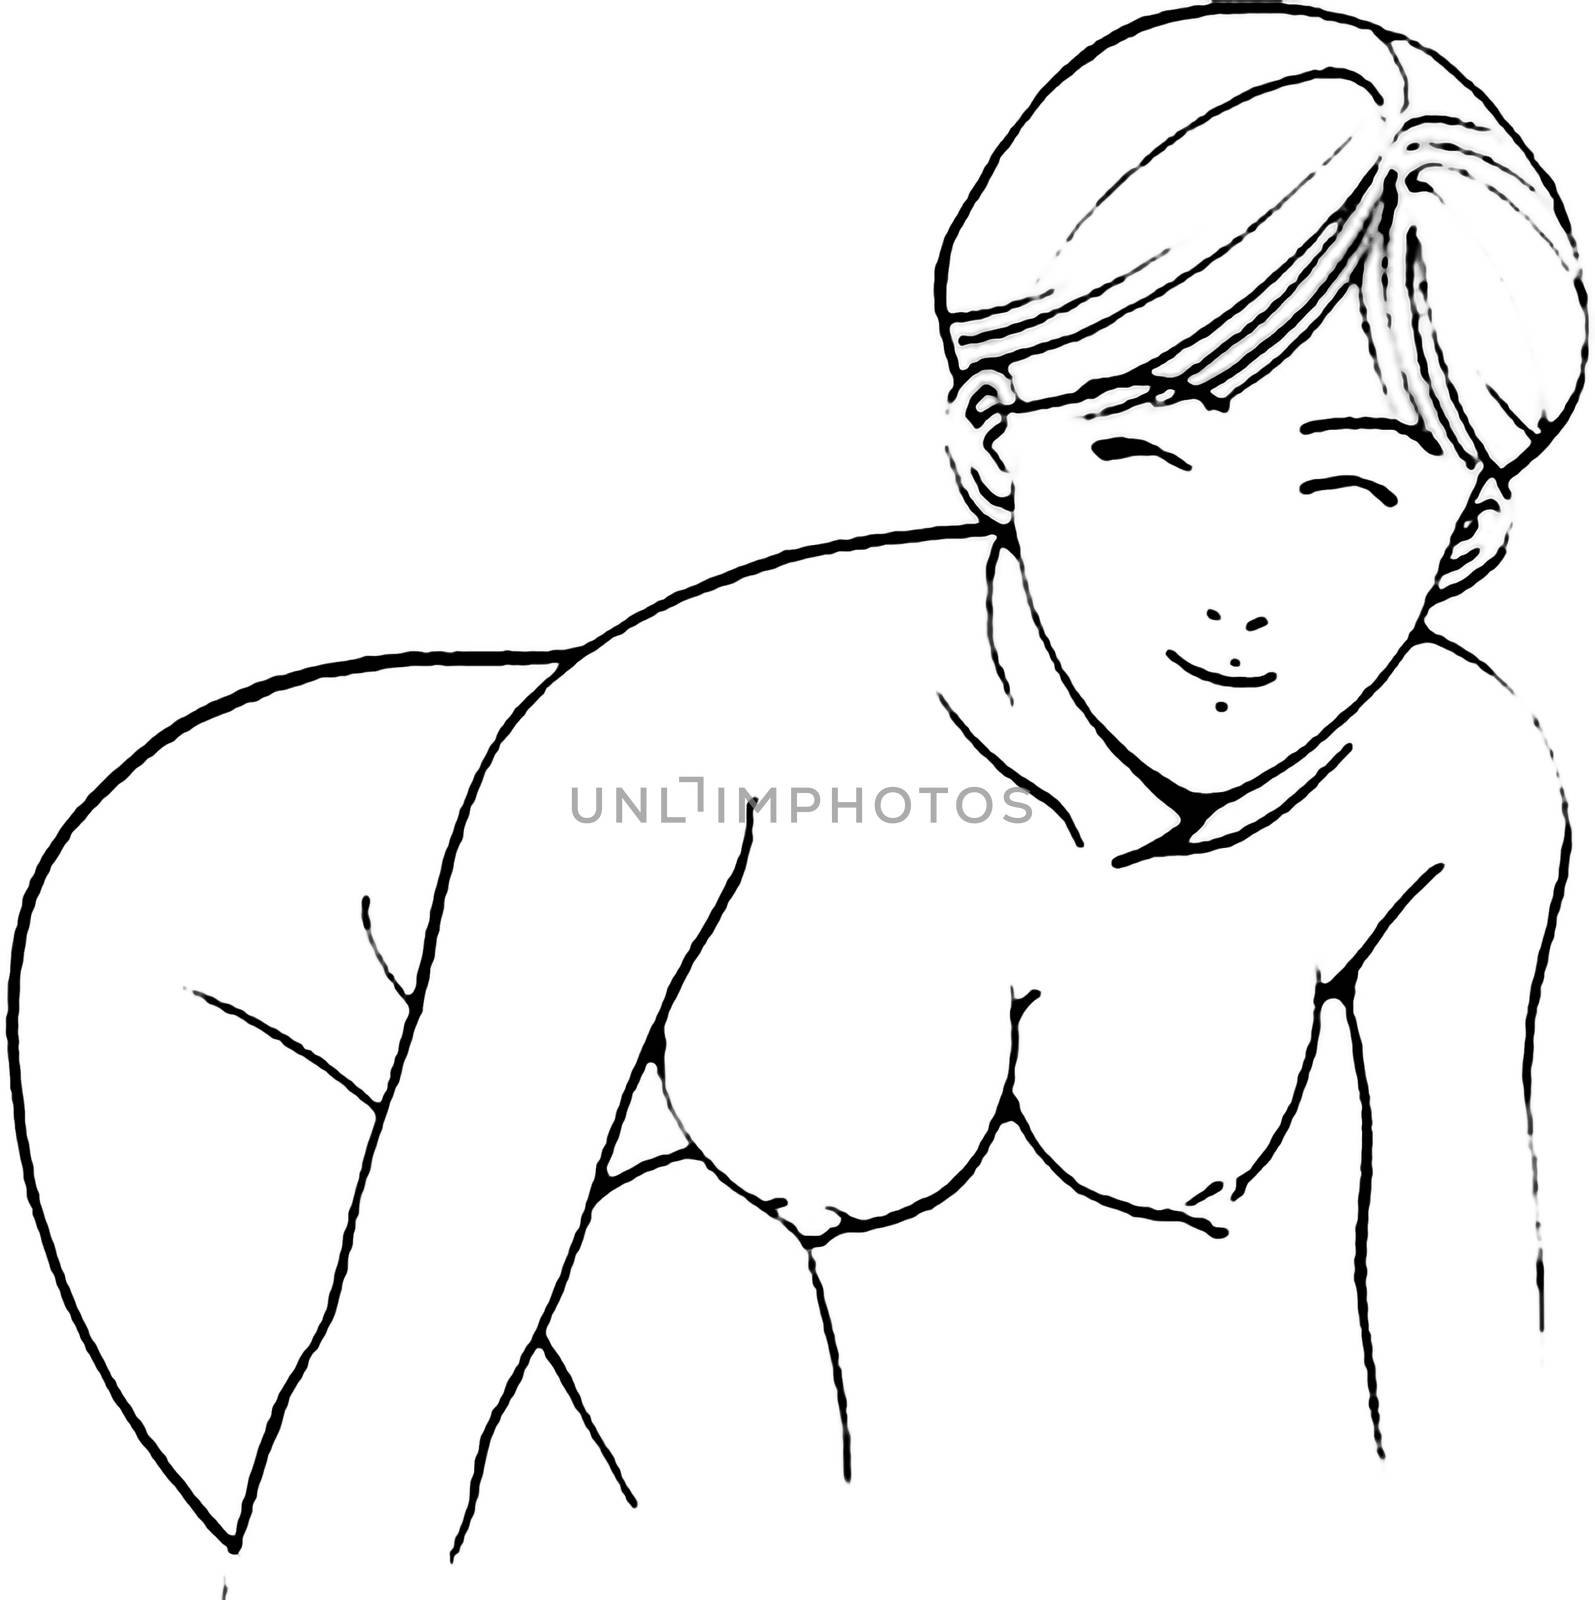 Female breast drawing tutorial. Drawing a woman's body with an emphasis on breasts. by DePo